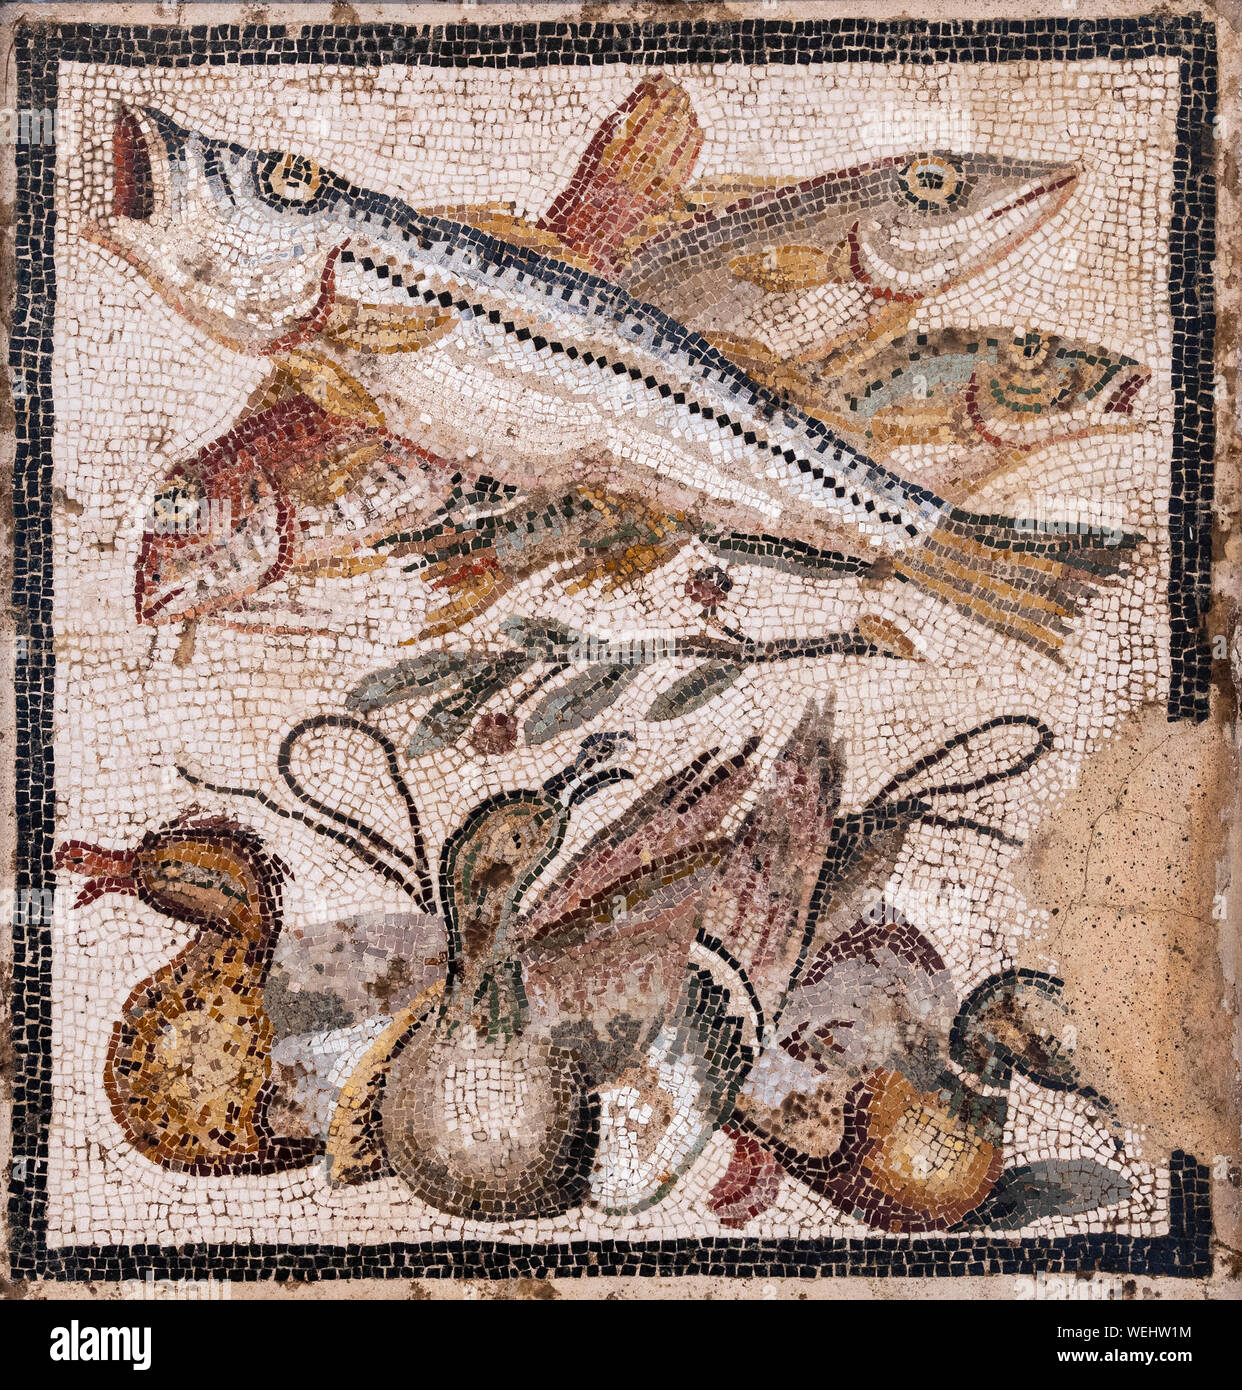 Roman wall mosaic from Pompeii depicting fish and ducks, now at the Naples Archaelogical Museum. Naples, Italy Stock Photo